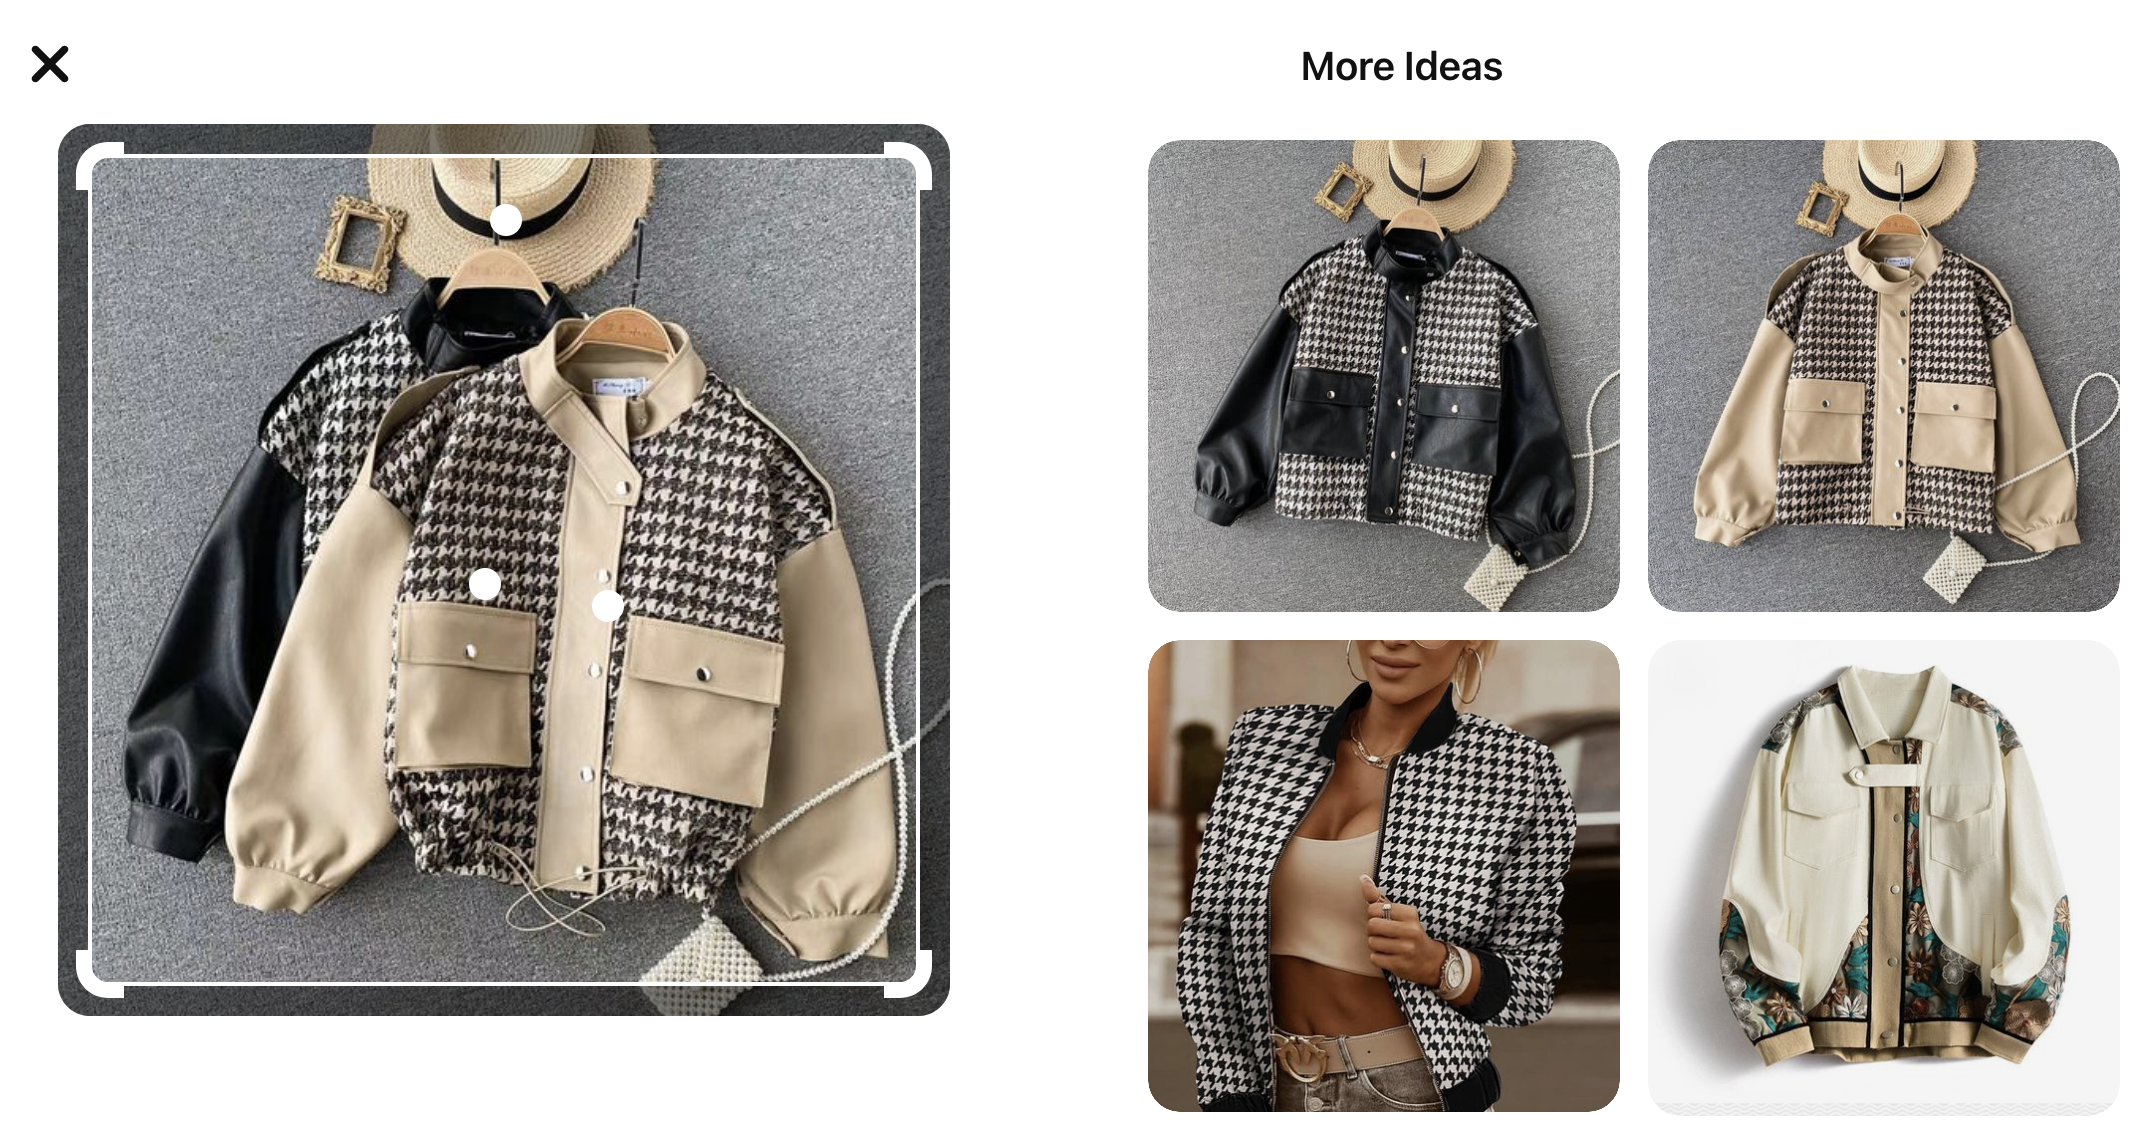 ecommerce trends: image search on Pinterest